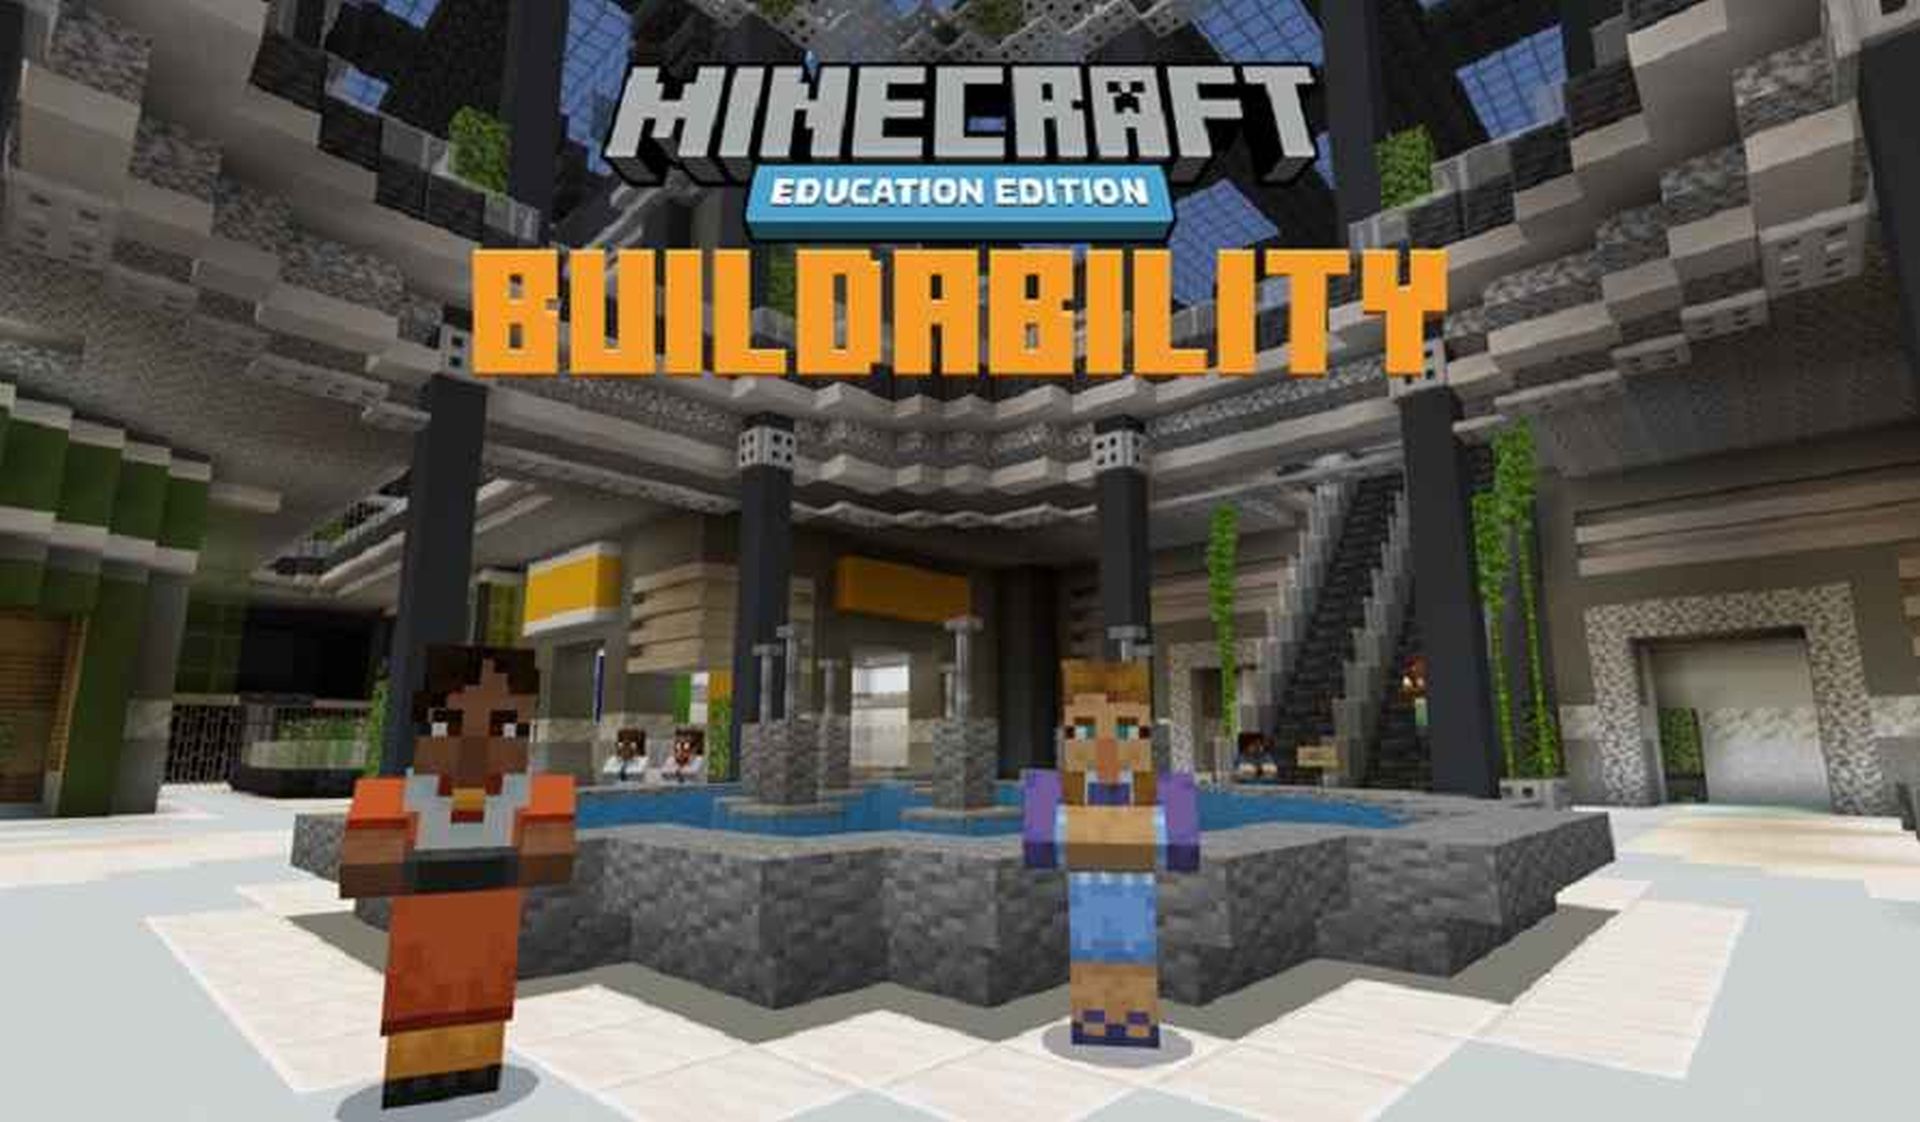 Several blocky characters stand outside a school entrance. The "Minecraft: Education Edition BuildAbility" logo is shown in bold letters.